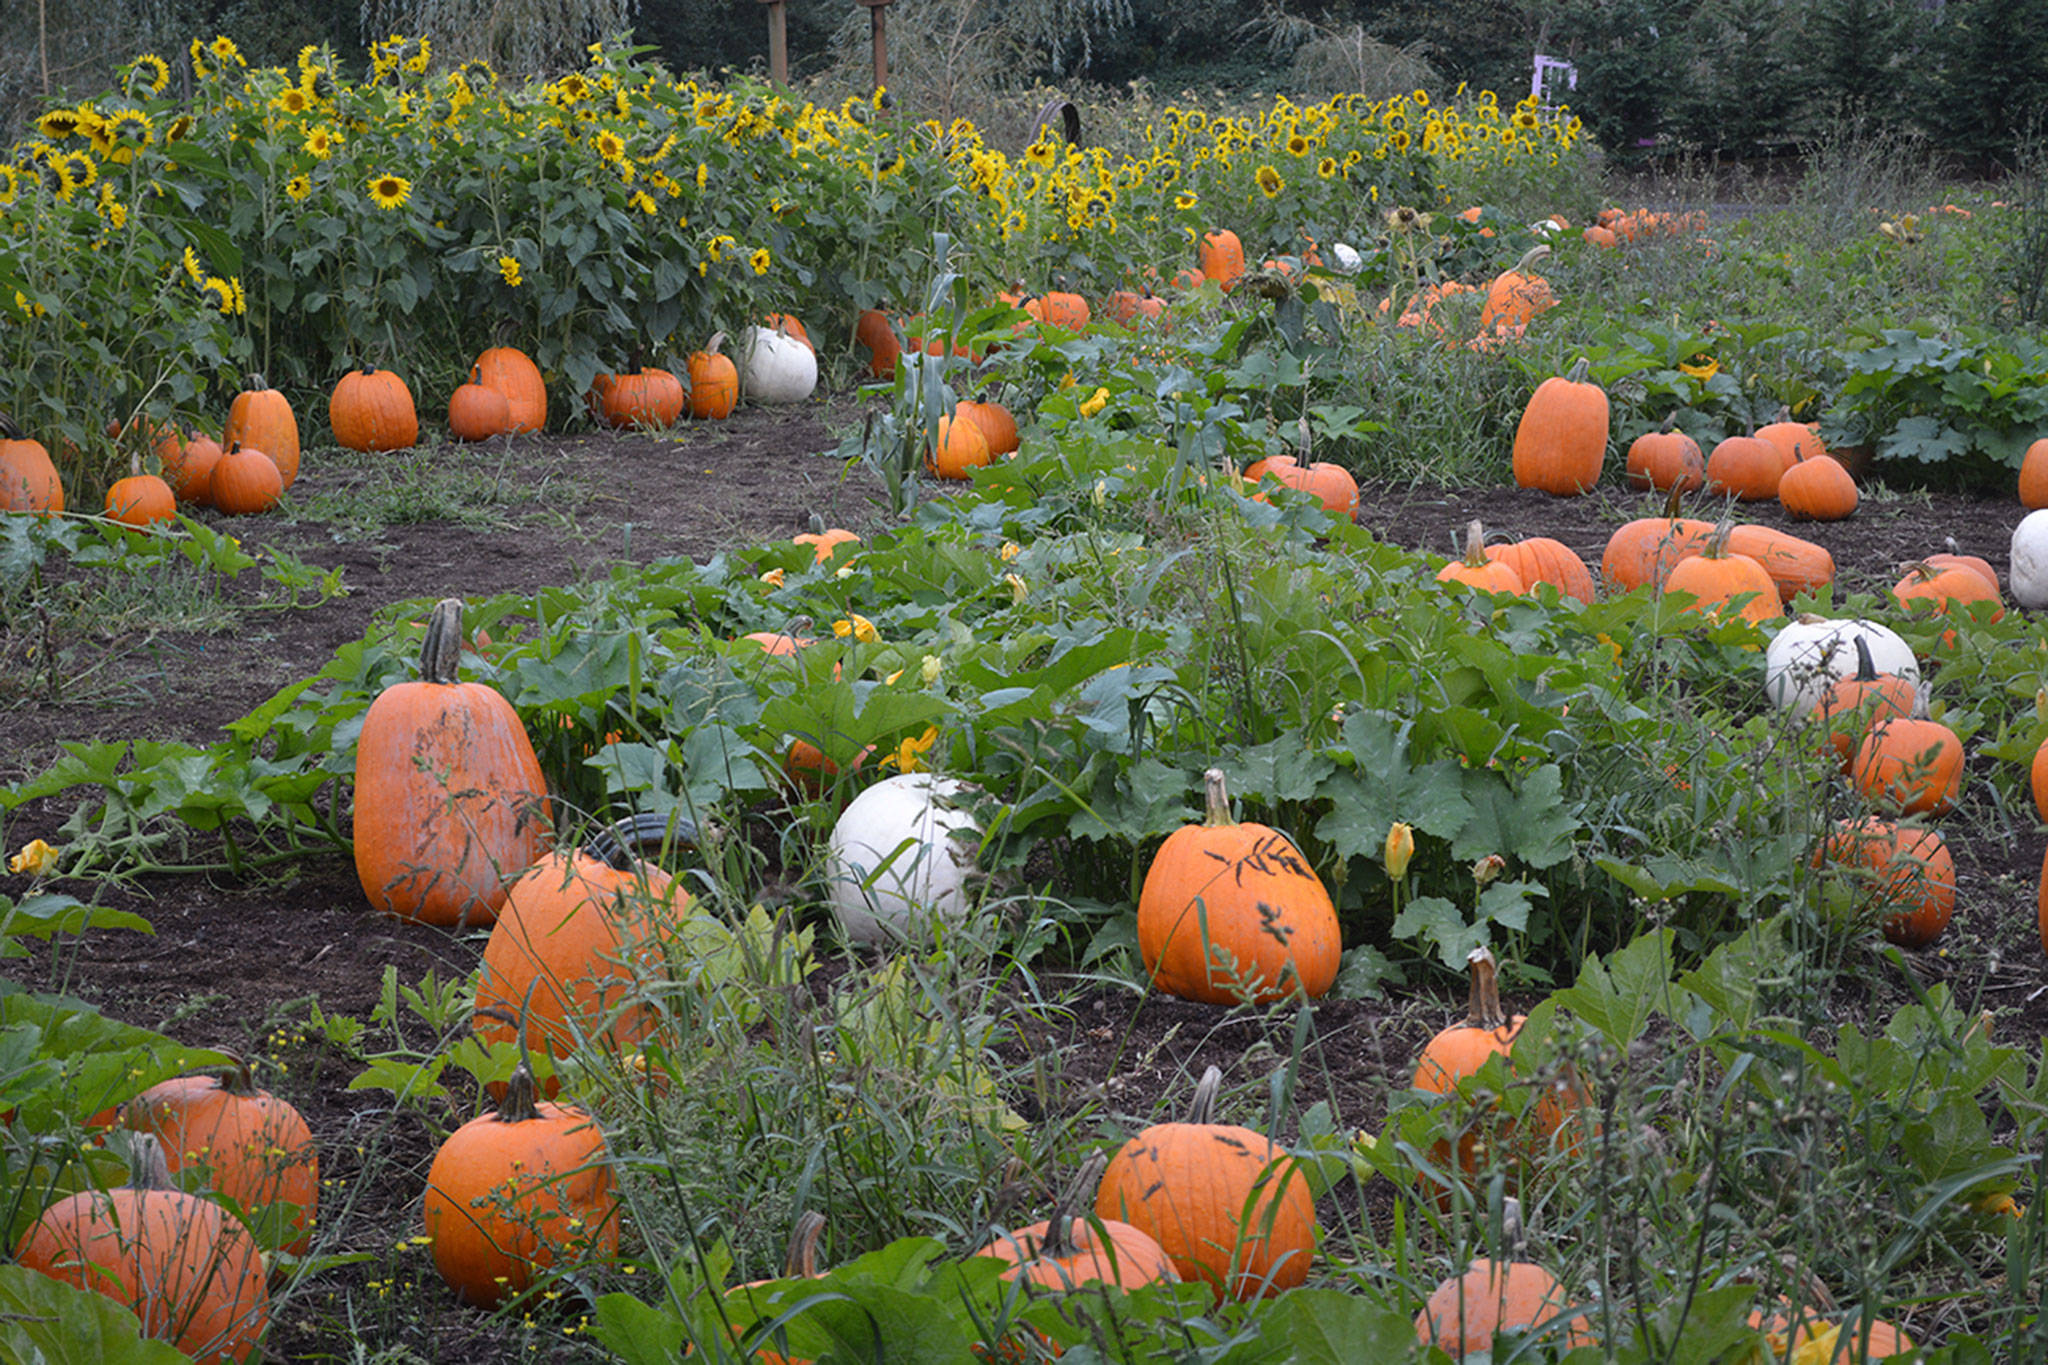 Lovin’ it: This outdoor pumpkin patch makes it so much easier (slide show)